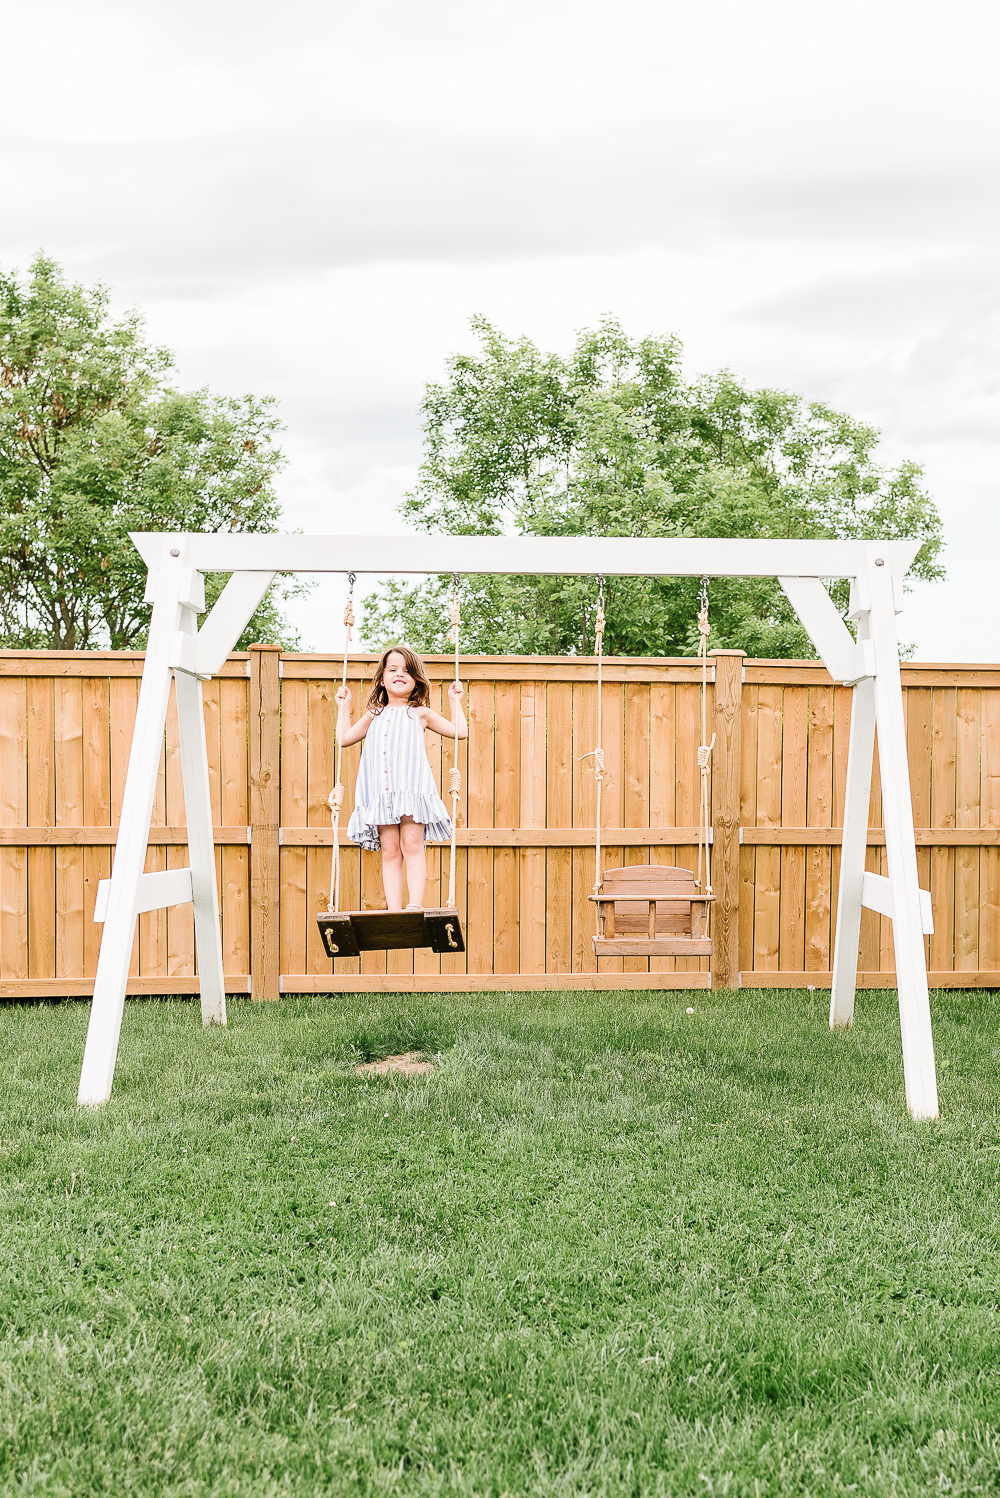 Simple Wooden Swing Set Plans Nick Alicia - Wooden Patio Swing Set Plans